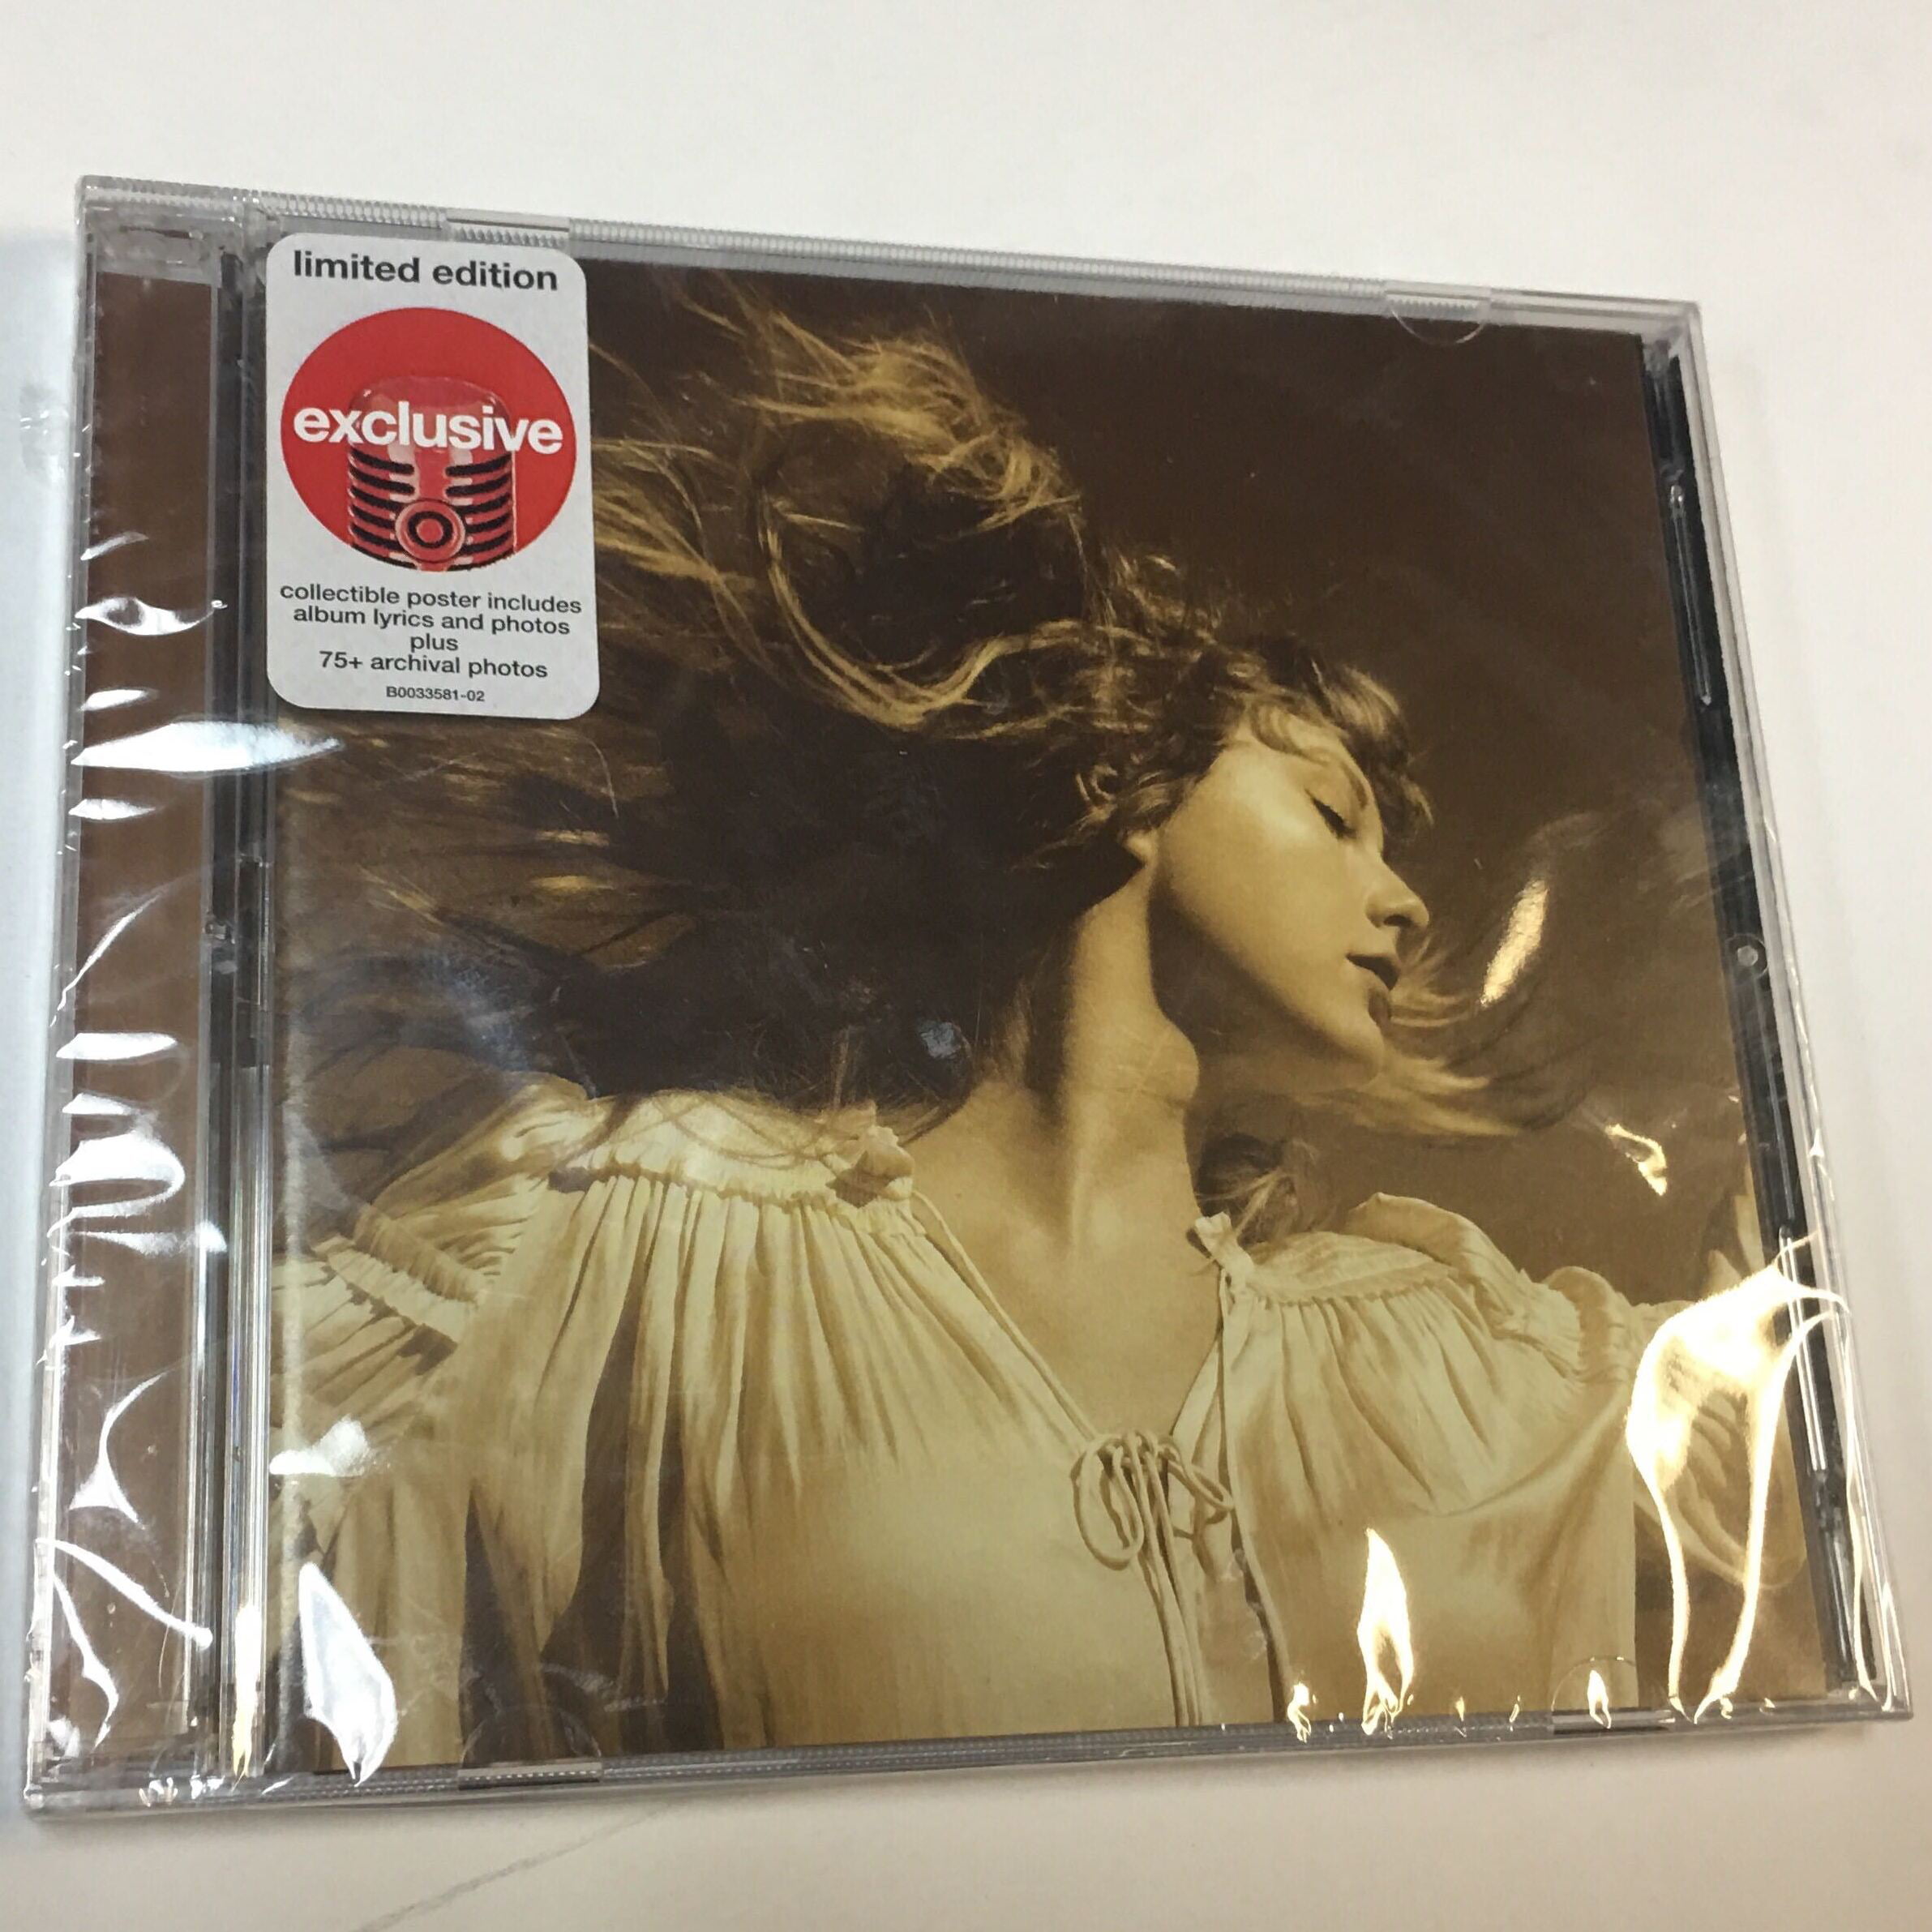 Fearless (Taylor's Version) CD – Taylor Swift Official Store